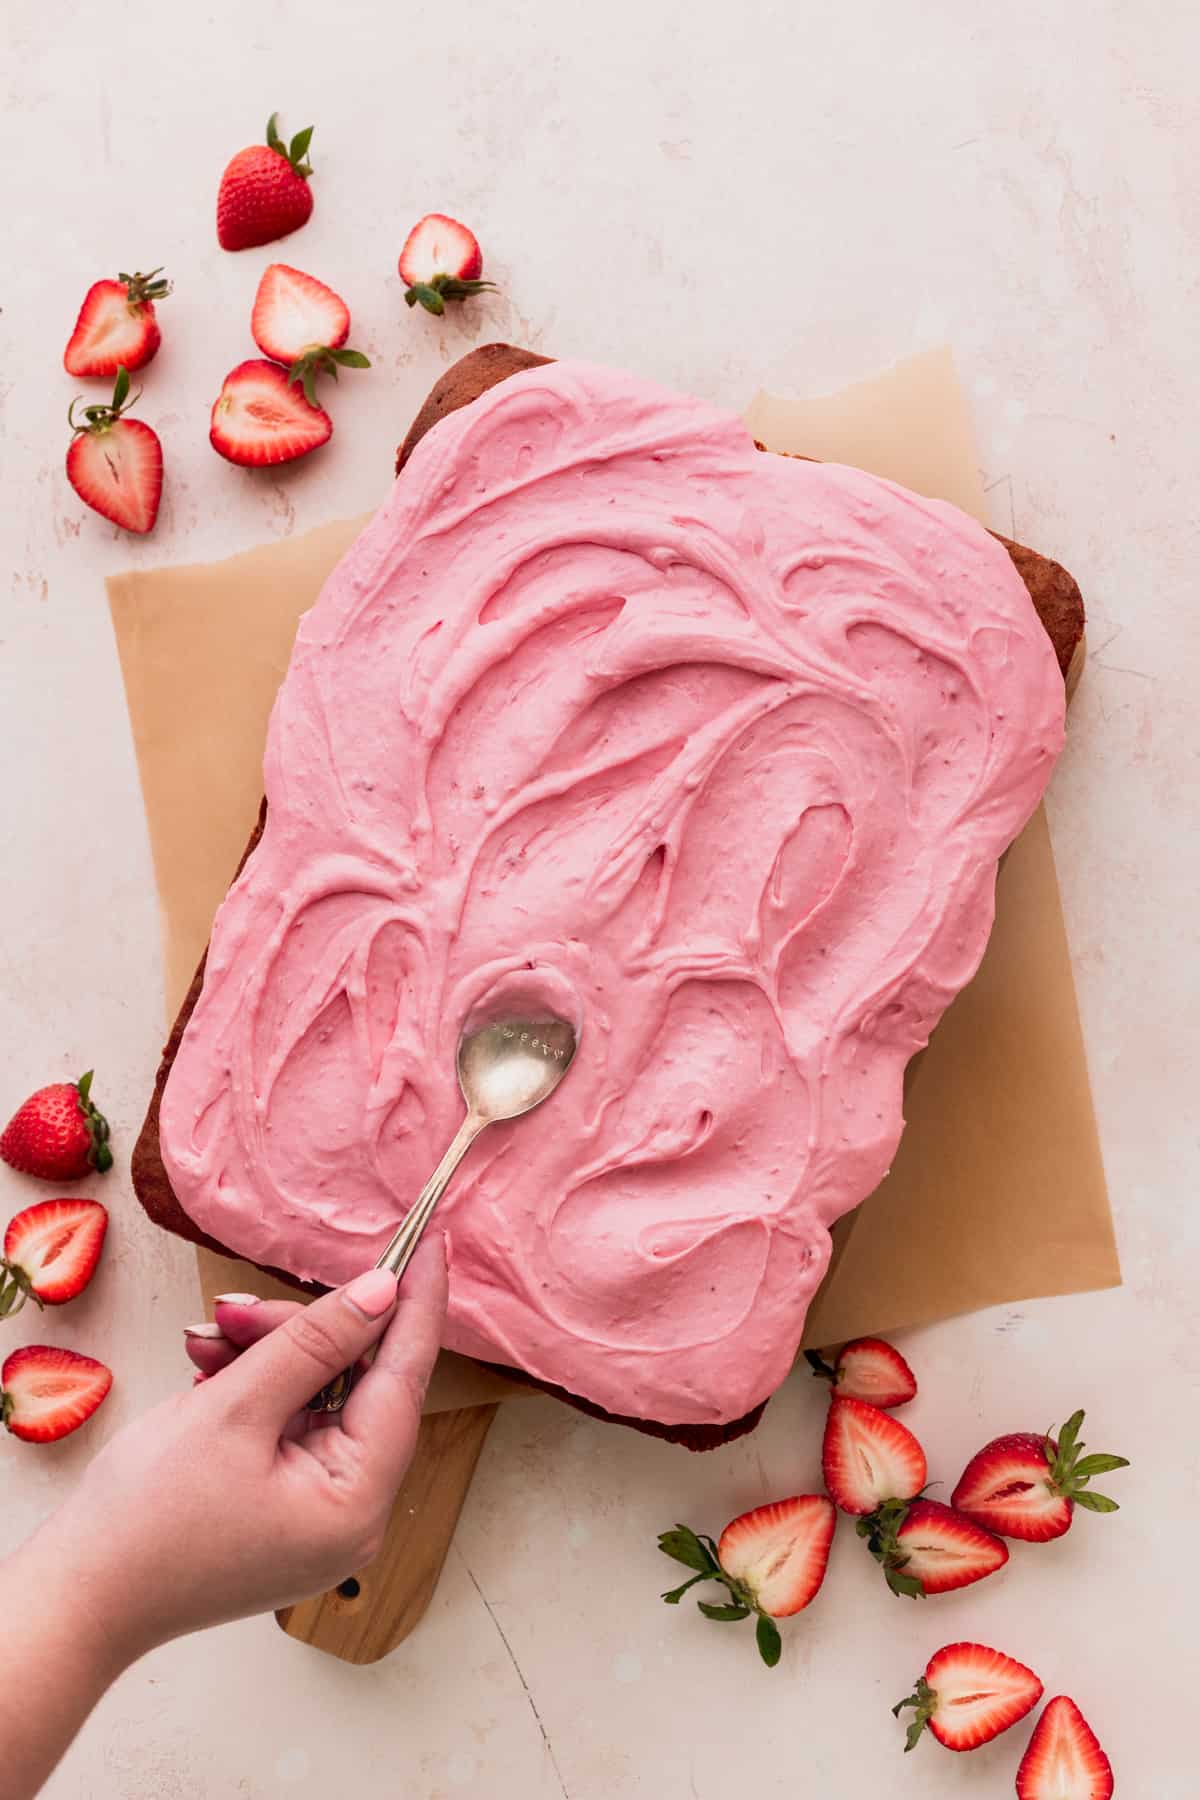 Spreading the strawberry frosting on top of the cake.